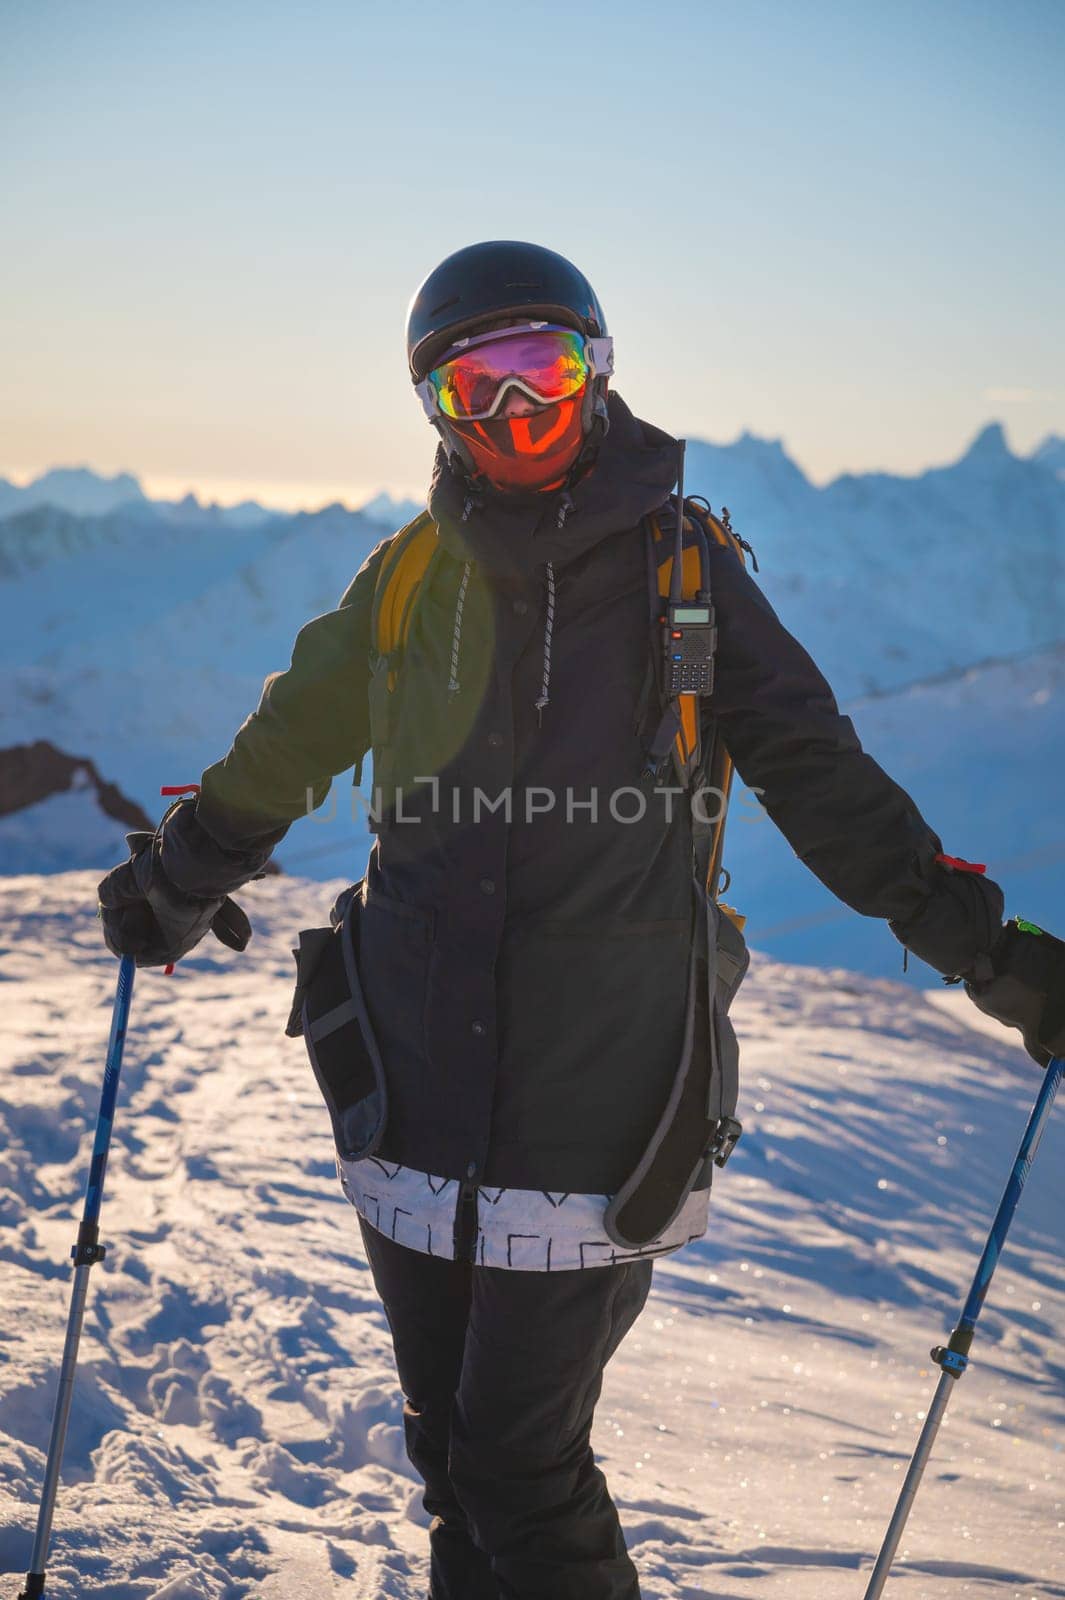 Winter skis. Ski portrait of a woman skier. Portrait of happy skier holding sticks and looking at camera against snowy mountains at sunset in the background.